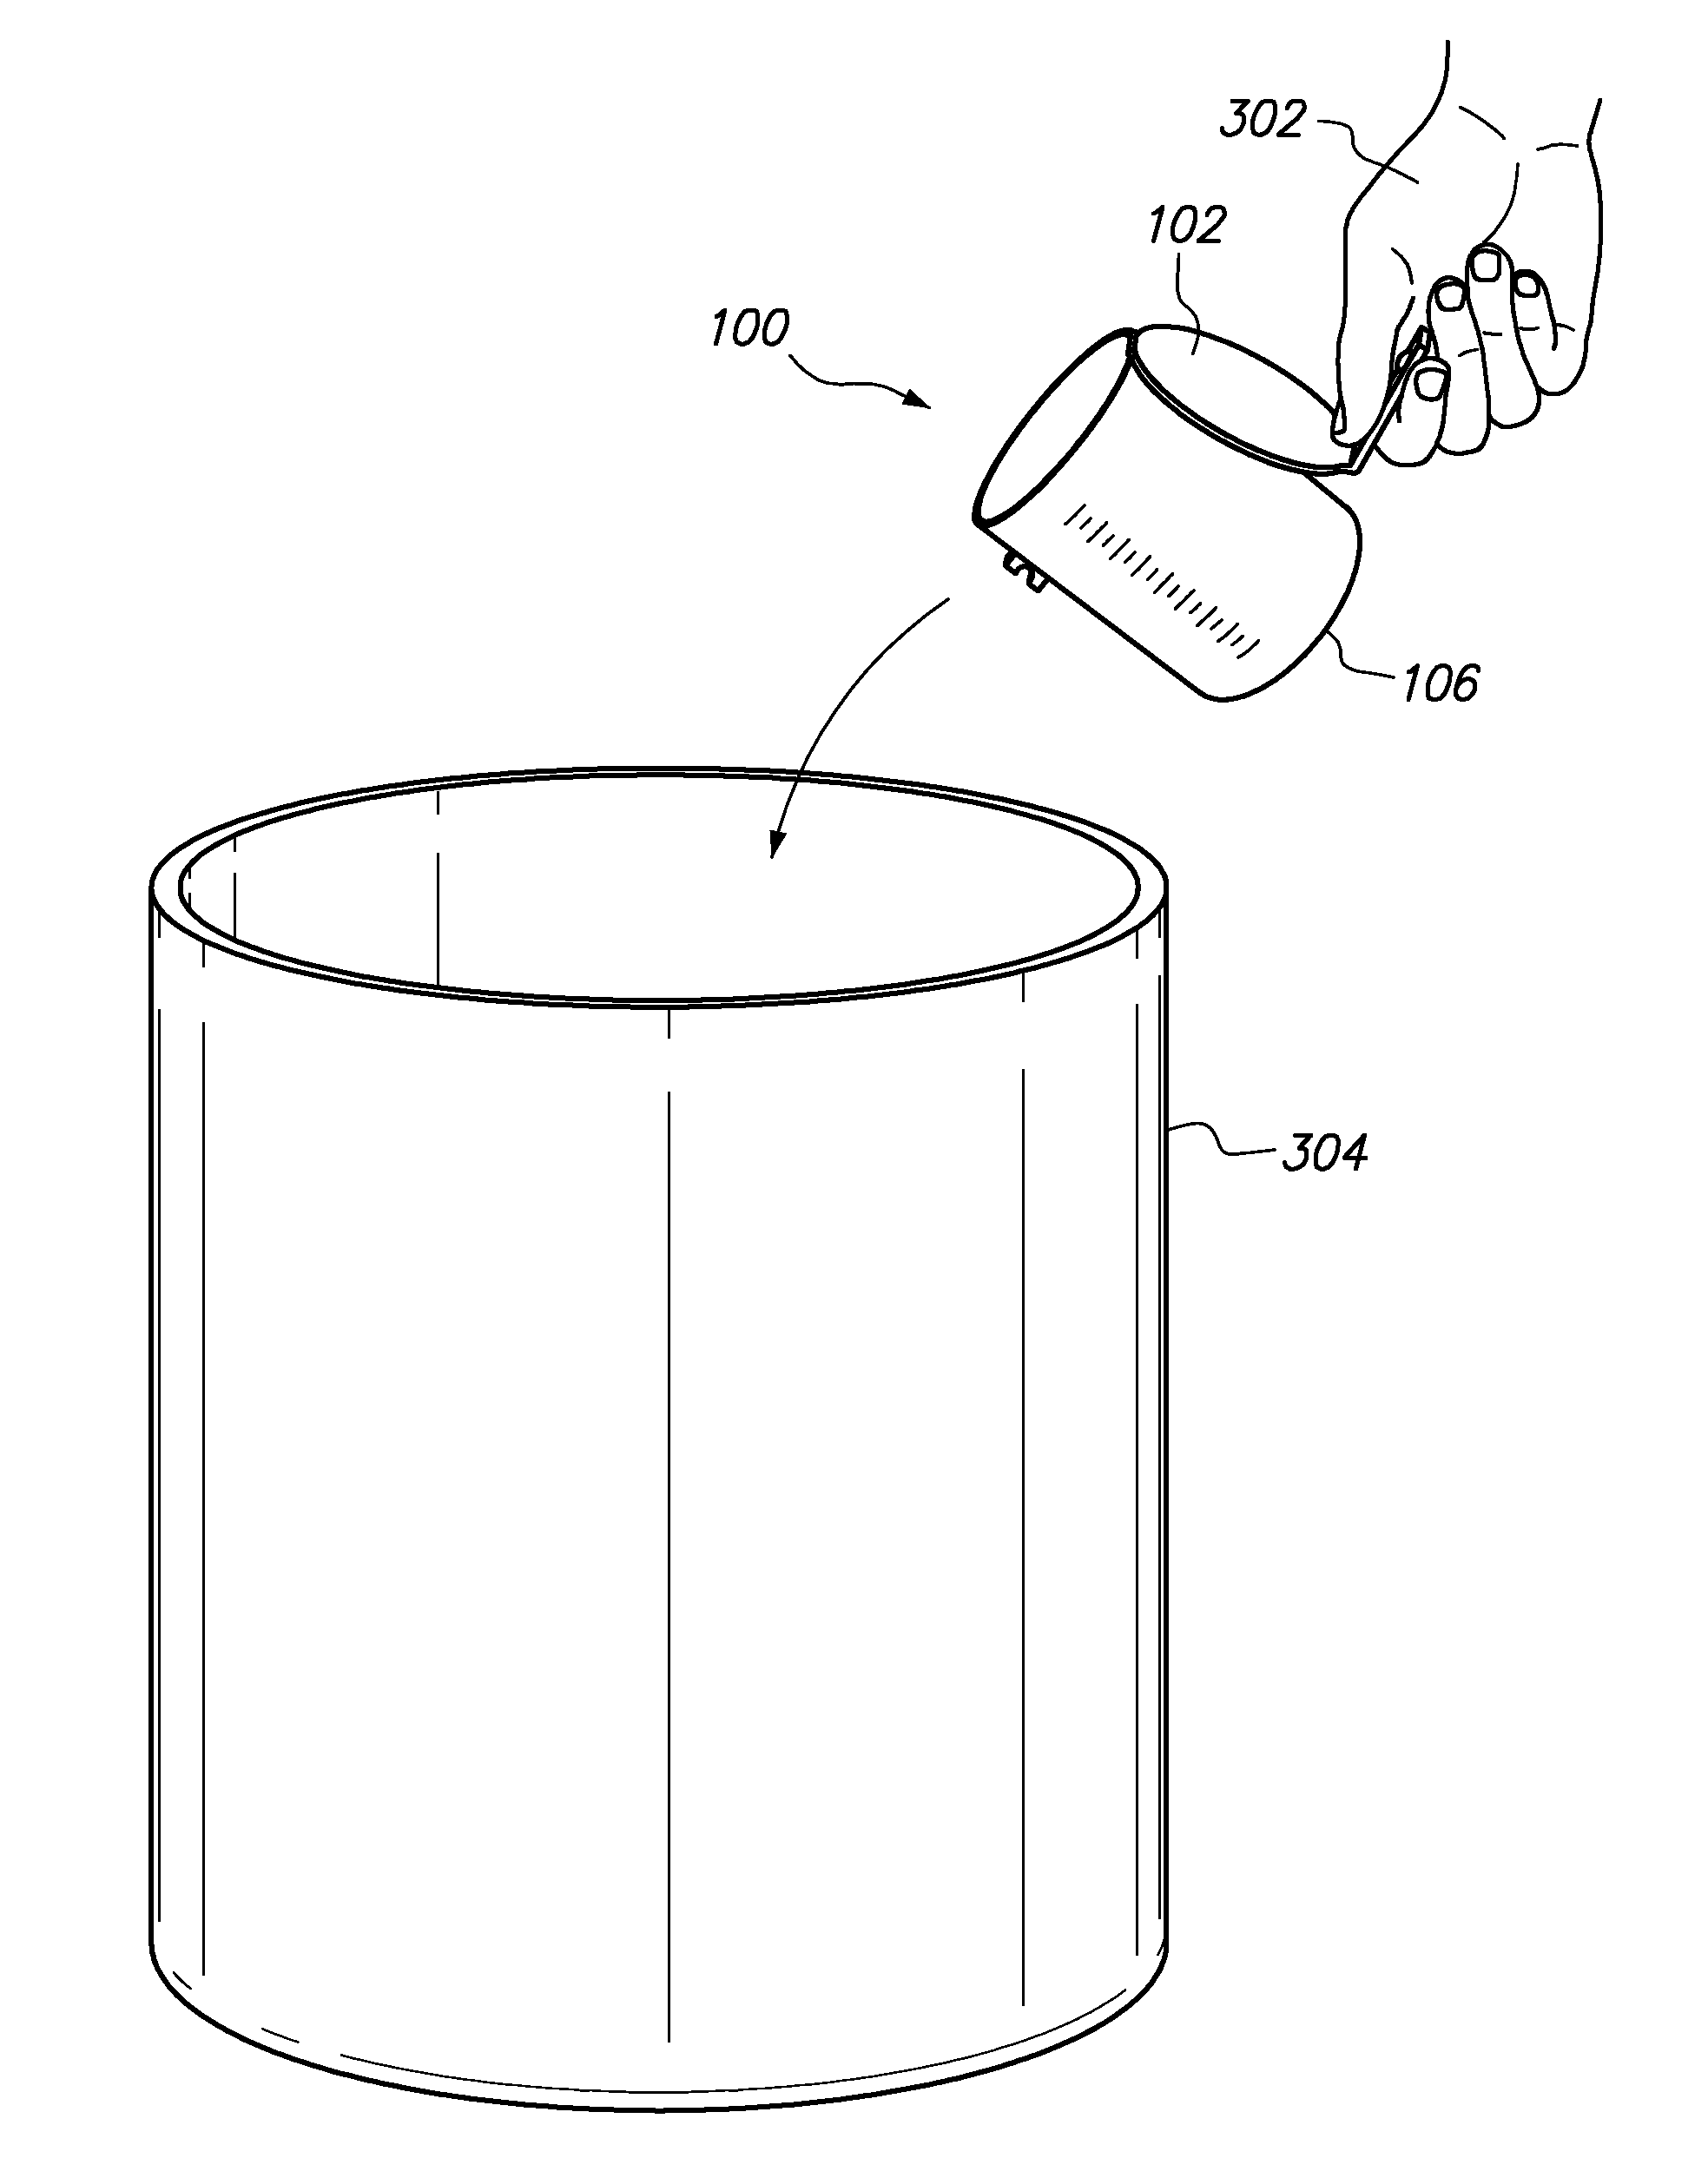 Powder supplement scooping system and method